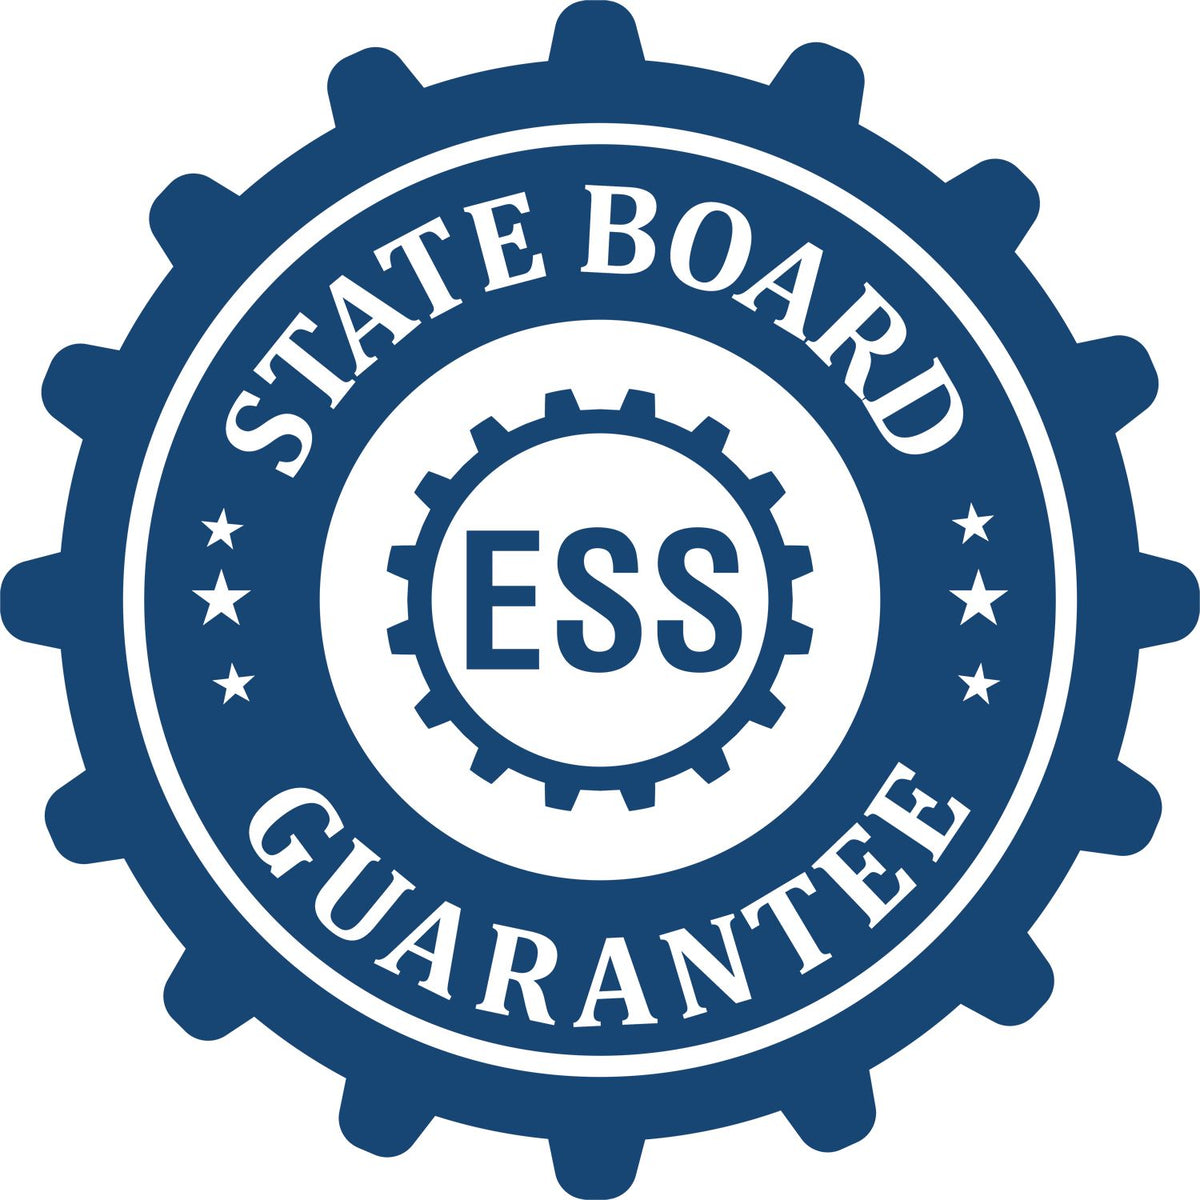 An emblem in a gear shape illustrating a state board guarantee for the State of New York Extended Long Reach Geologist Seal